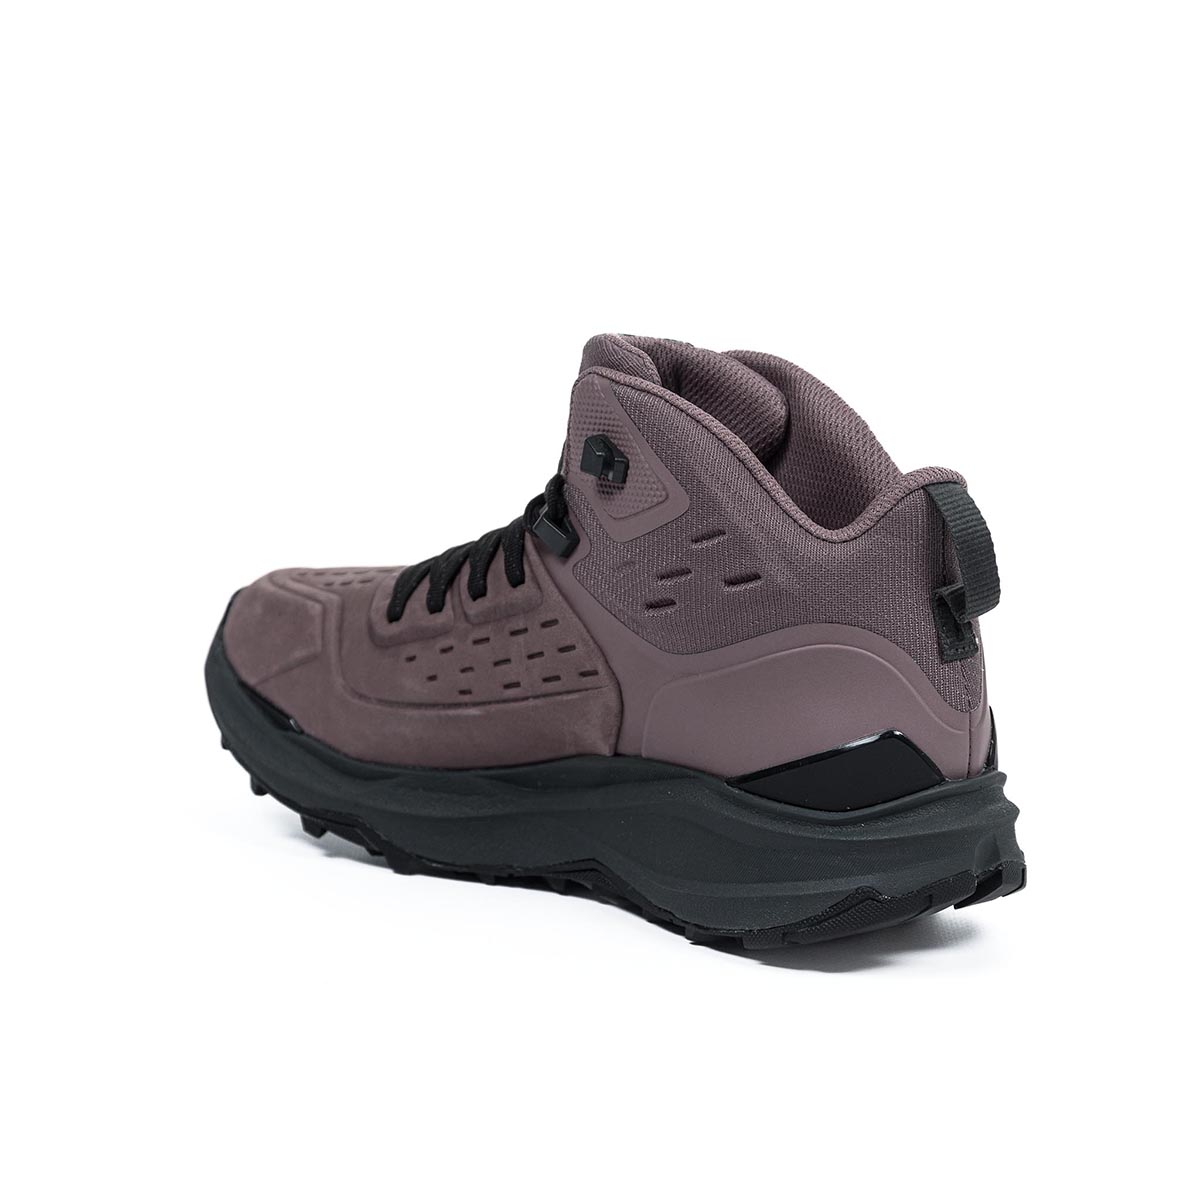 THE NORTH FACE - VECTIV EXPLORIS II LEATHER